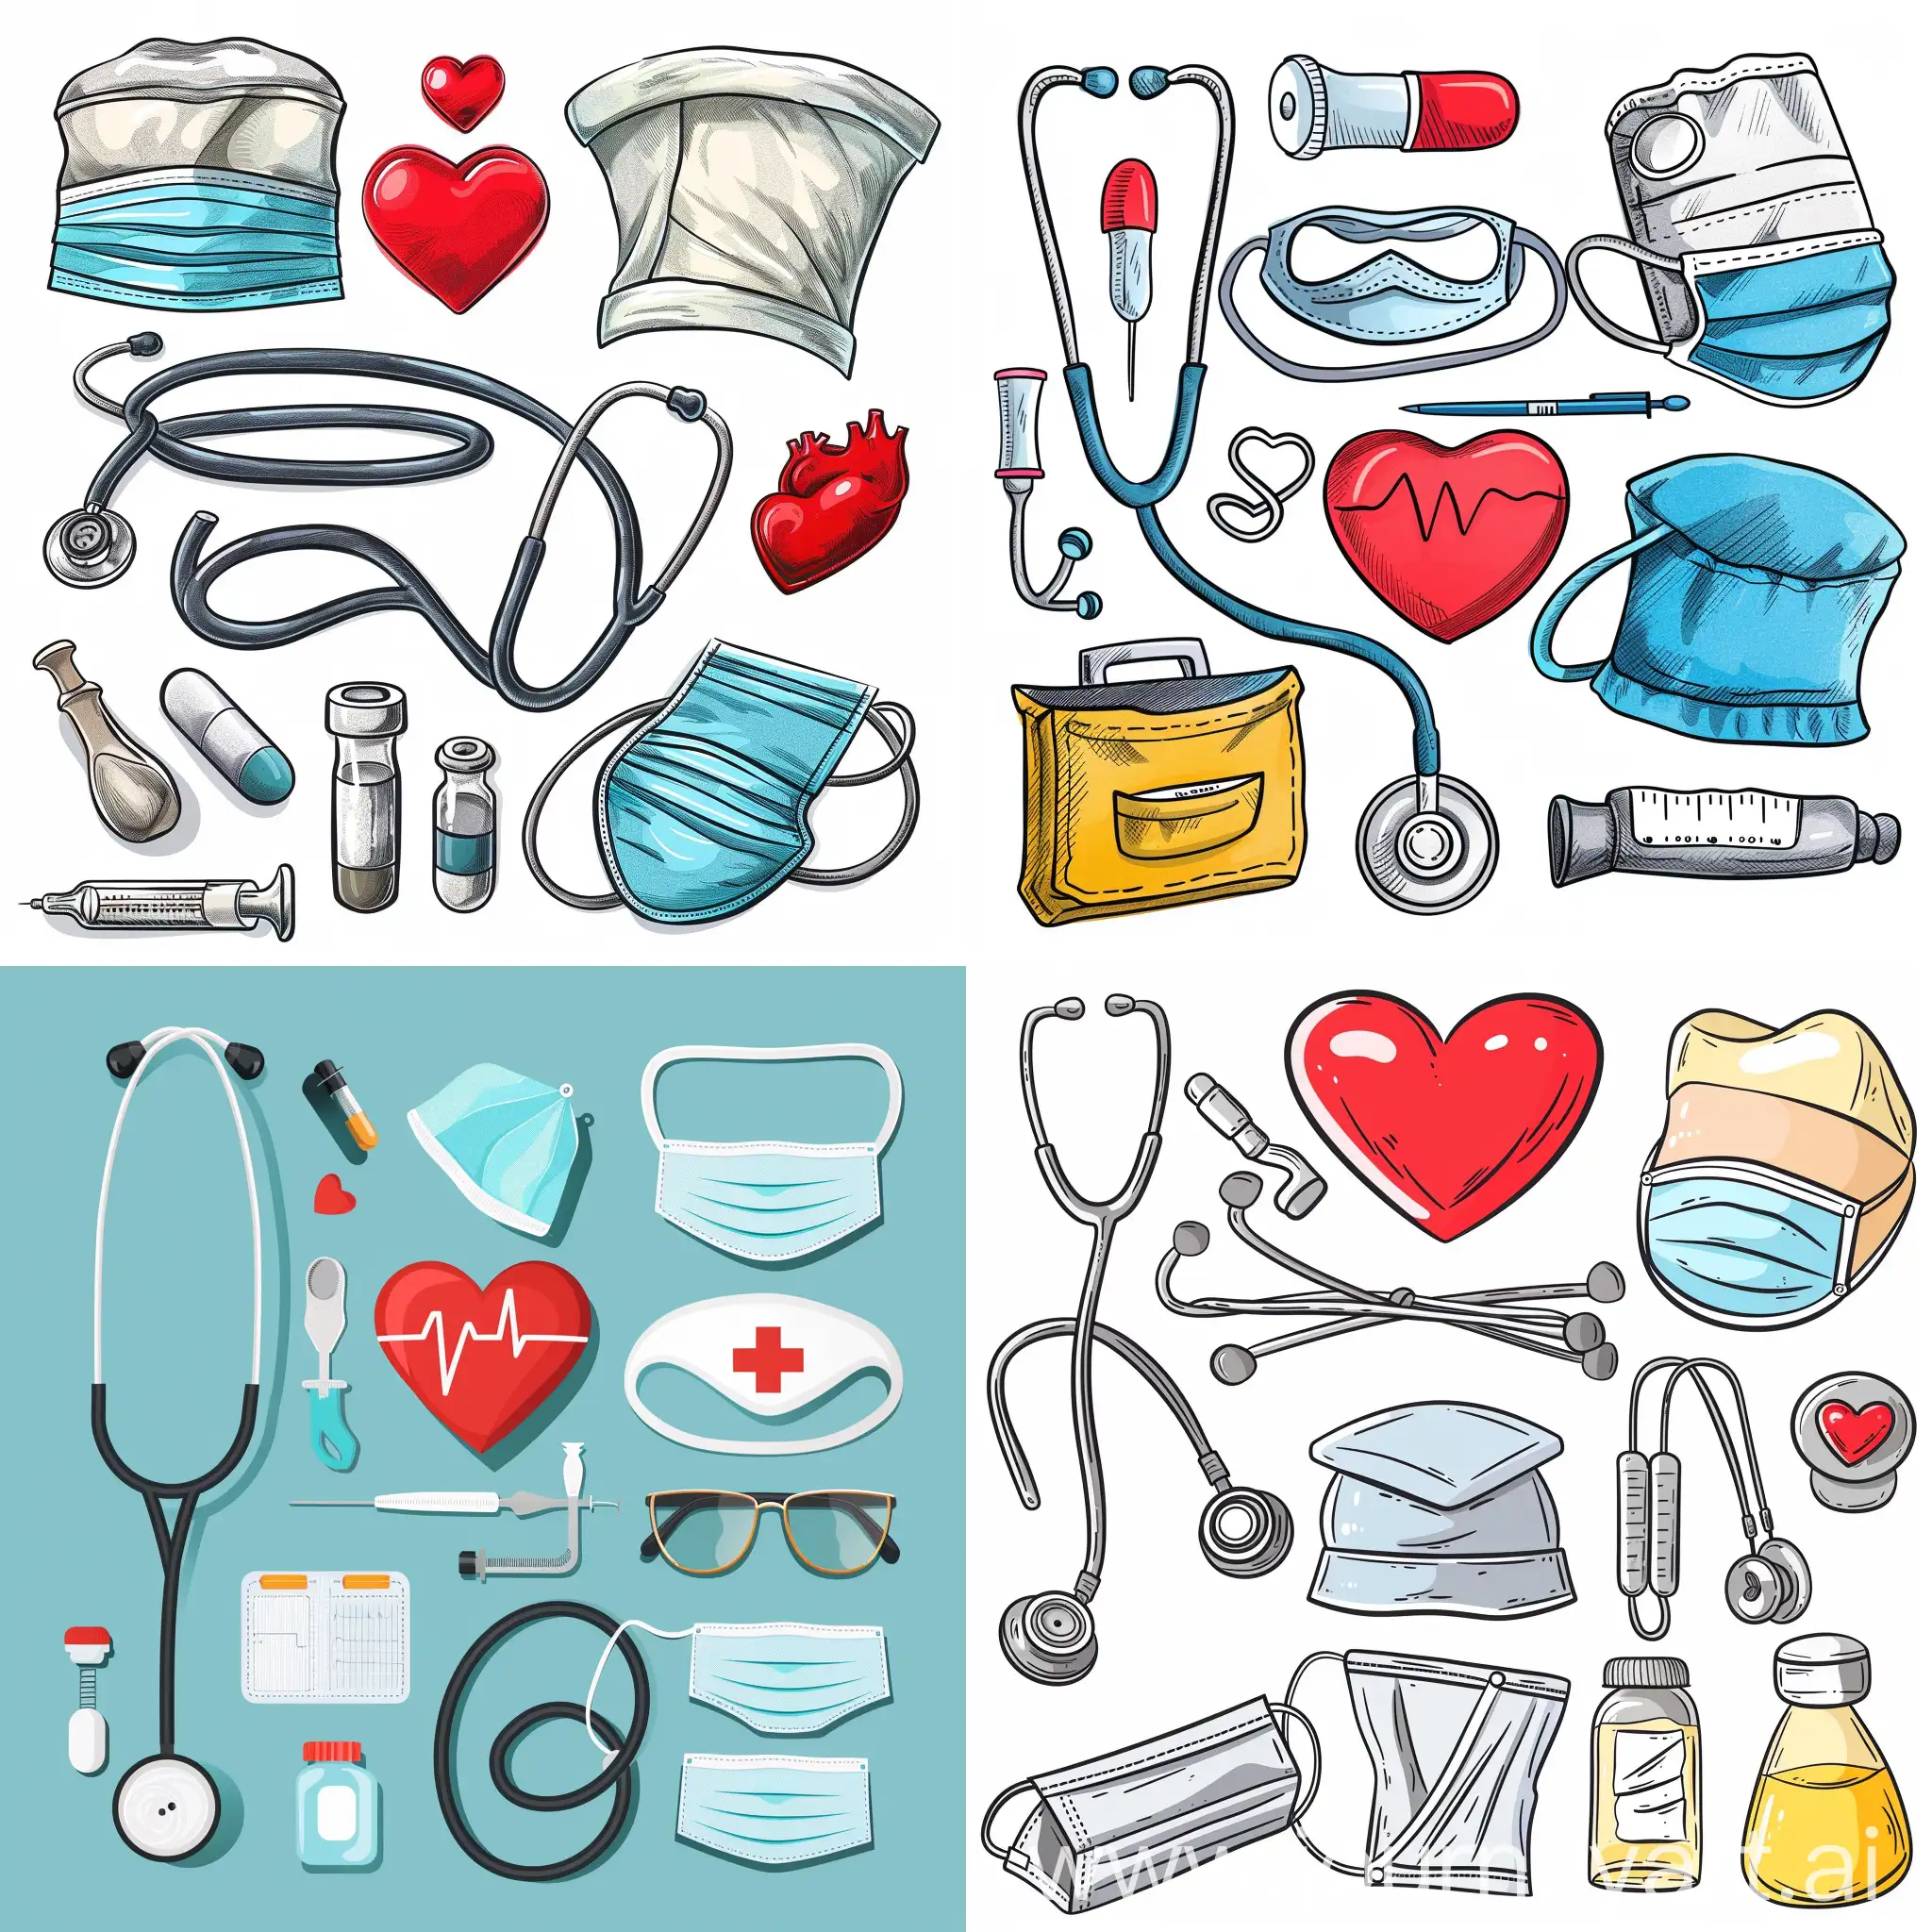 Medical-Supplies-and-Nurse-Cap-with-Stethoscope-and-Red-Heart-Illustration